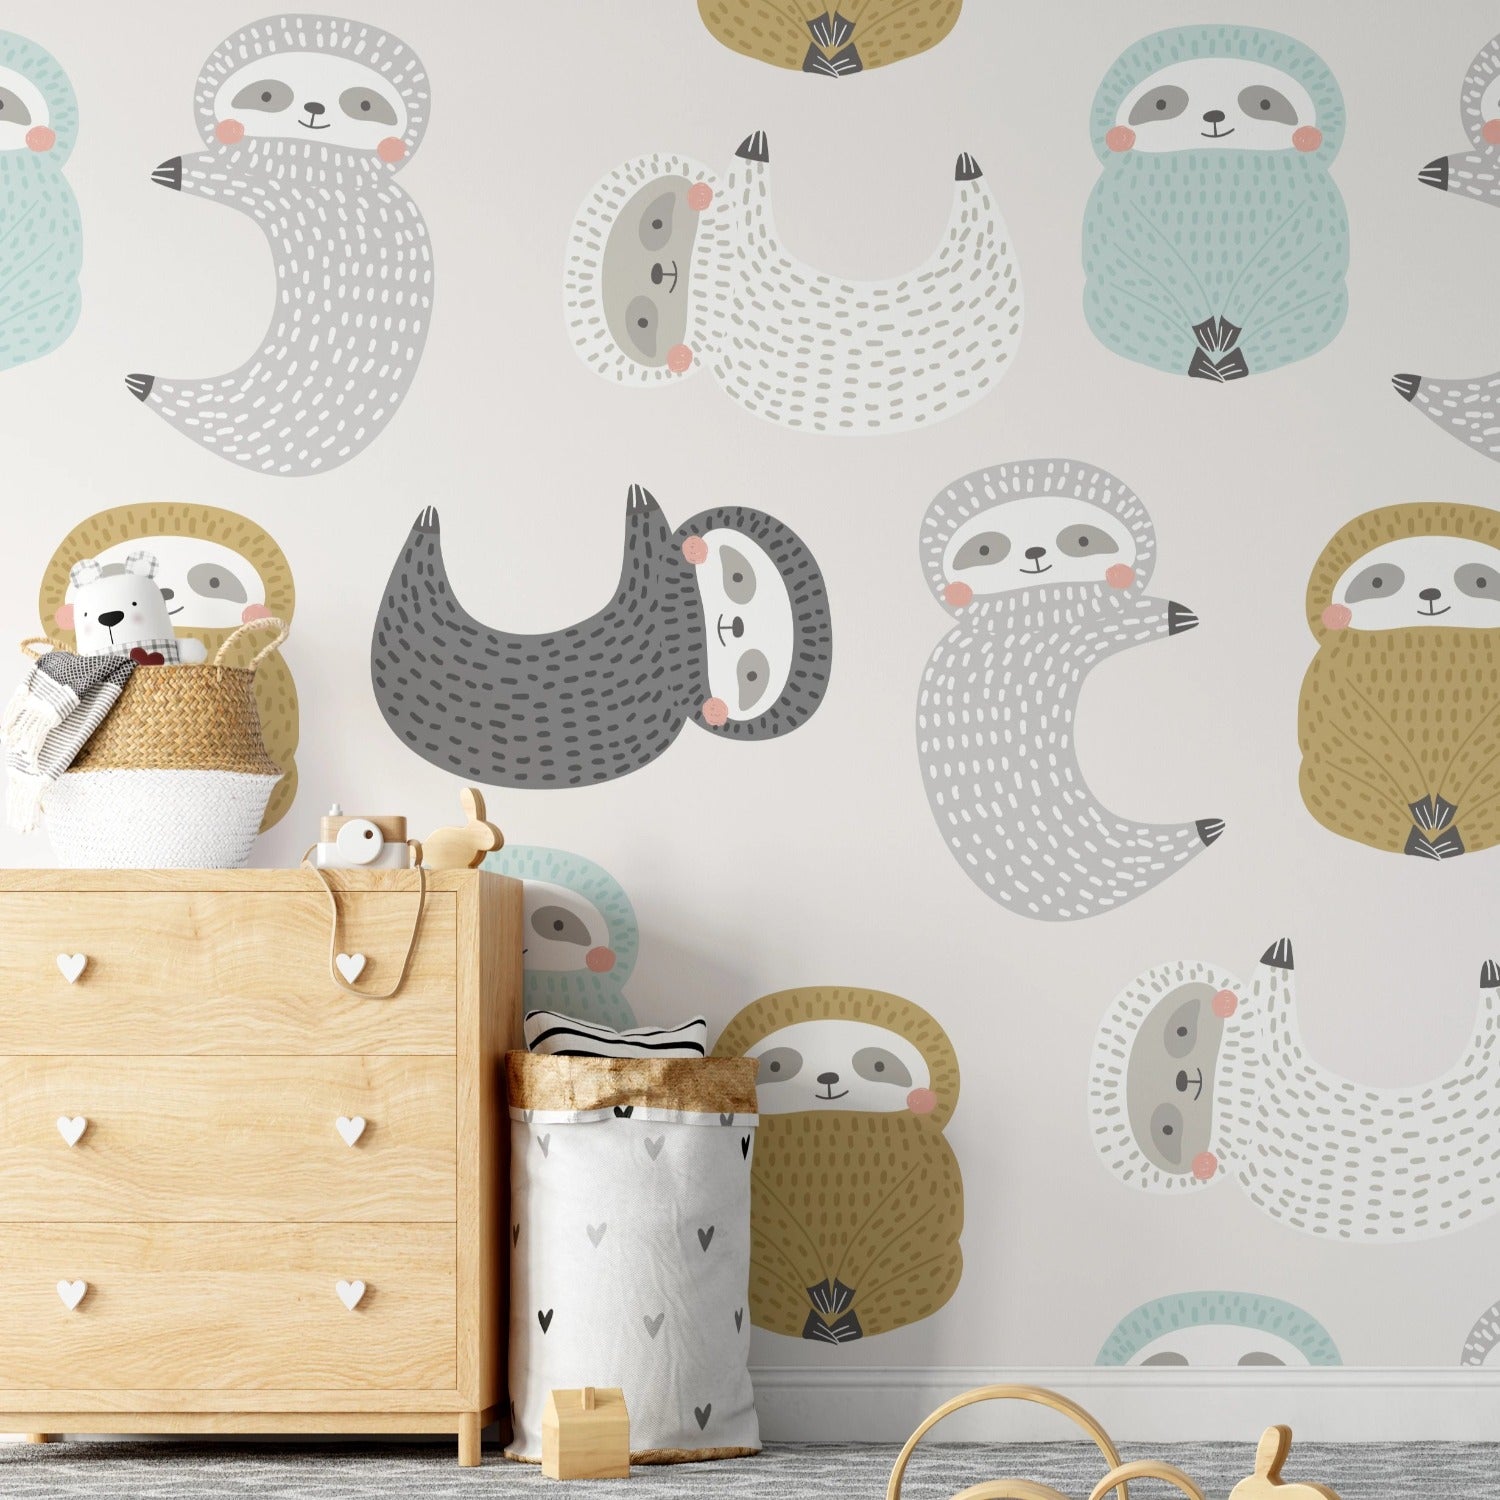 A wider view of the child's room showing more of the "Sleepy Sloths Wallpaper". The perspective includes a playful teepee-style tent in grey and black, with a cushion that has a similar sloth motif. The room is accessorized with wooden toys on the floor, a storage bin with a heart motif, and a few toys peeking out from the top of the dresser. The overall ambiance is cozy and conducive to a child's play and rest.